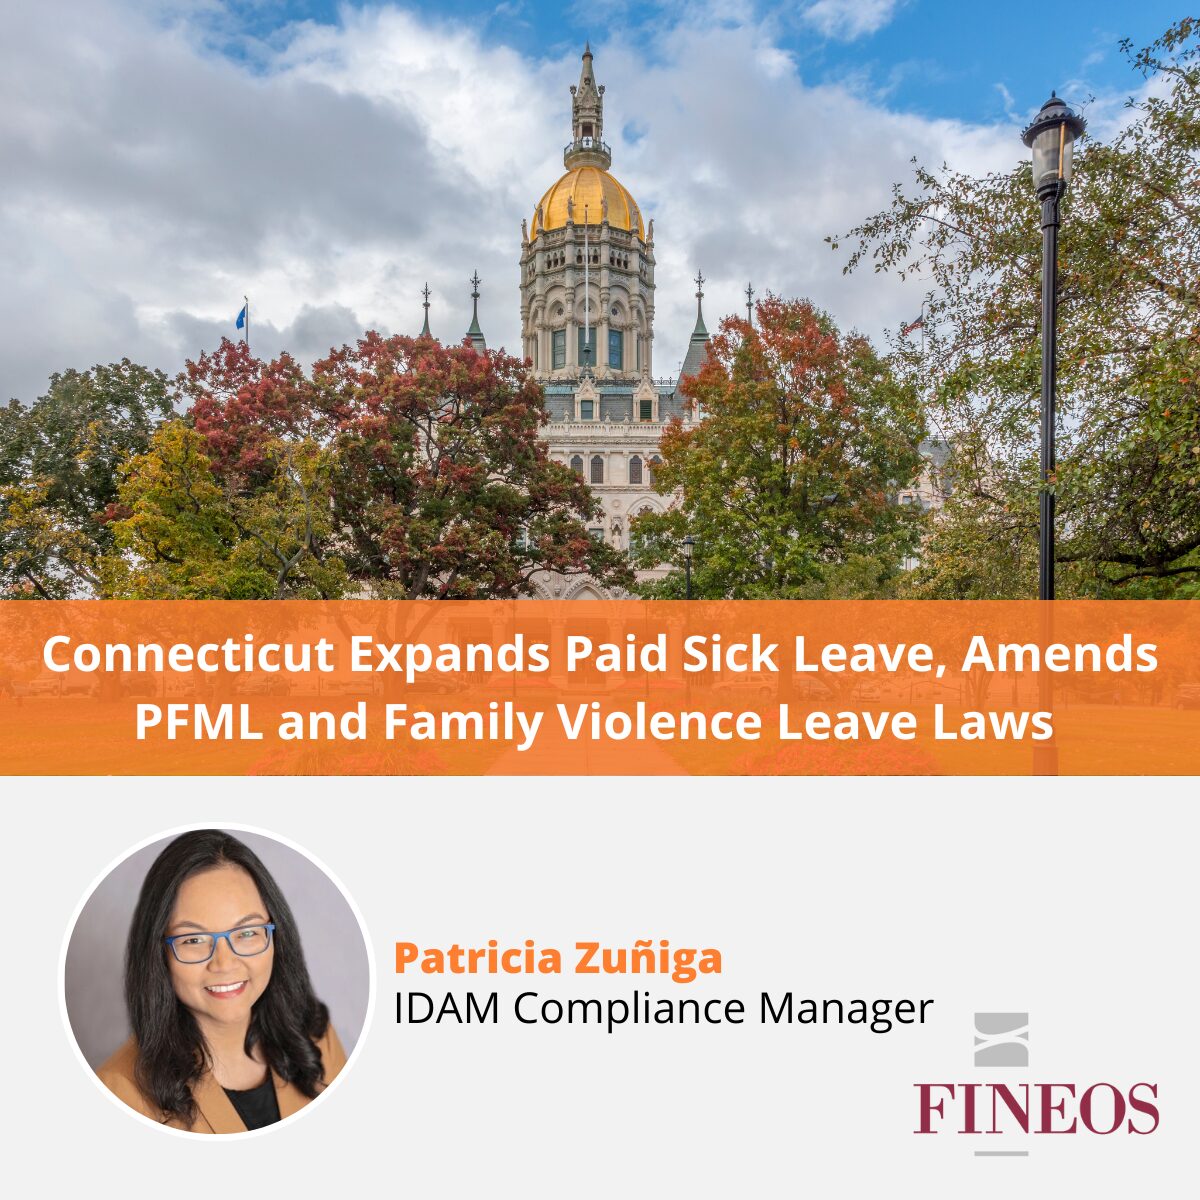 Connecticut Expands Paid Sick Leave, Amends PFML and Family Violence Leave Laws